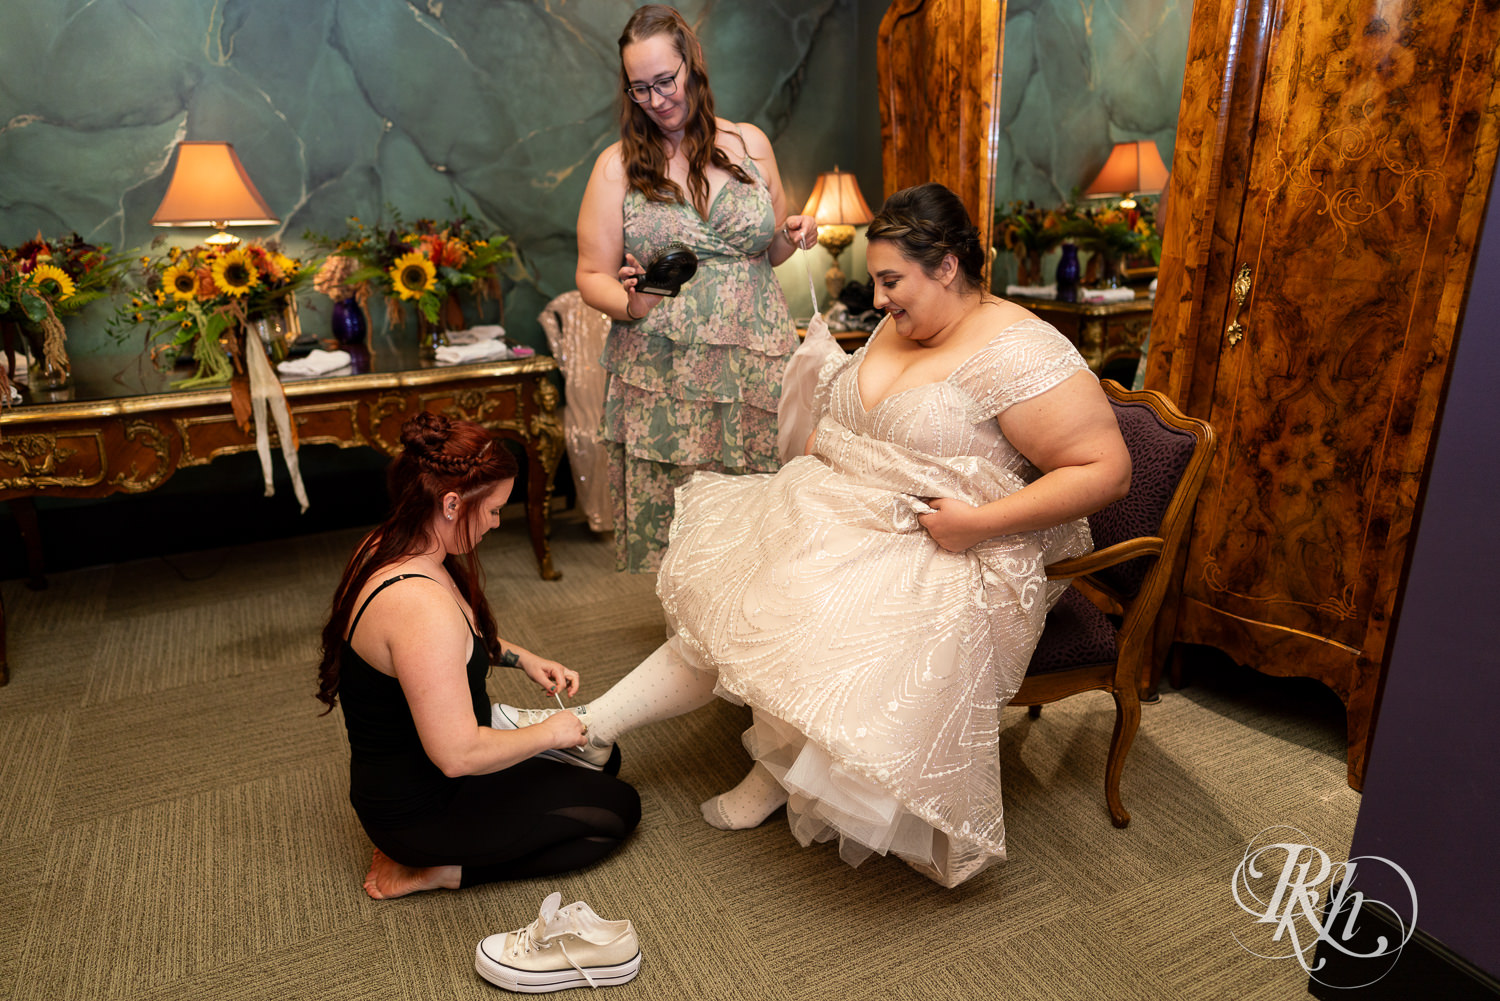 Plus size bride getting ready for wedding at Kellerman's Event Center in White Bear Lake, Minnesota.